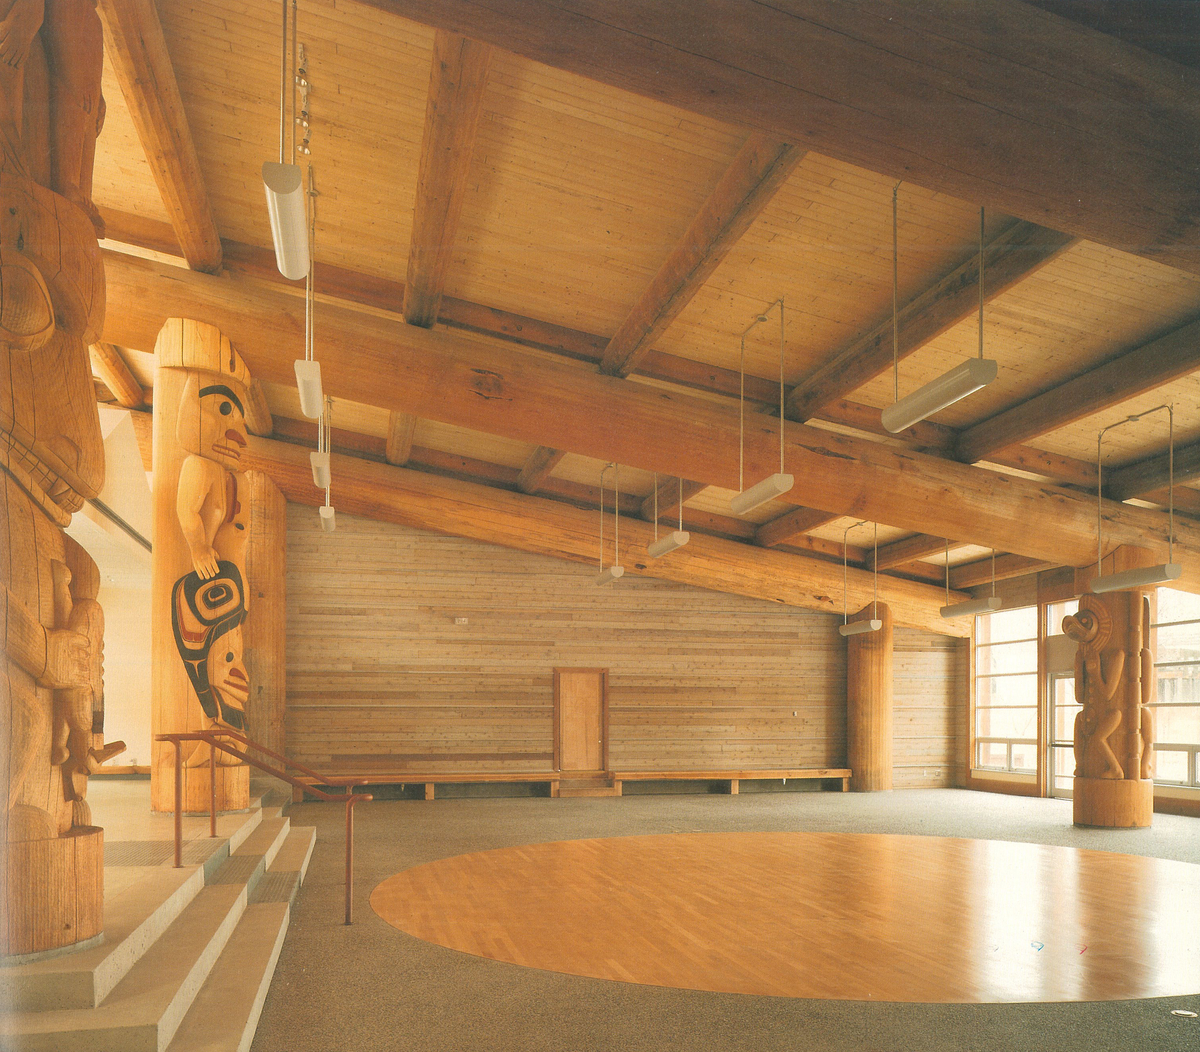 Indoor daytime image of First Nations Longhouse central room at The University of British Columbia showing massive pole beams and columns near the four striking cedar houseposts; hand-carved and a metre in diameter